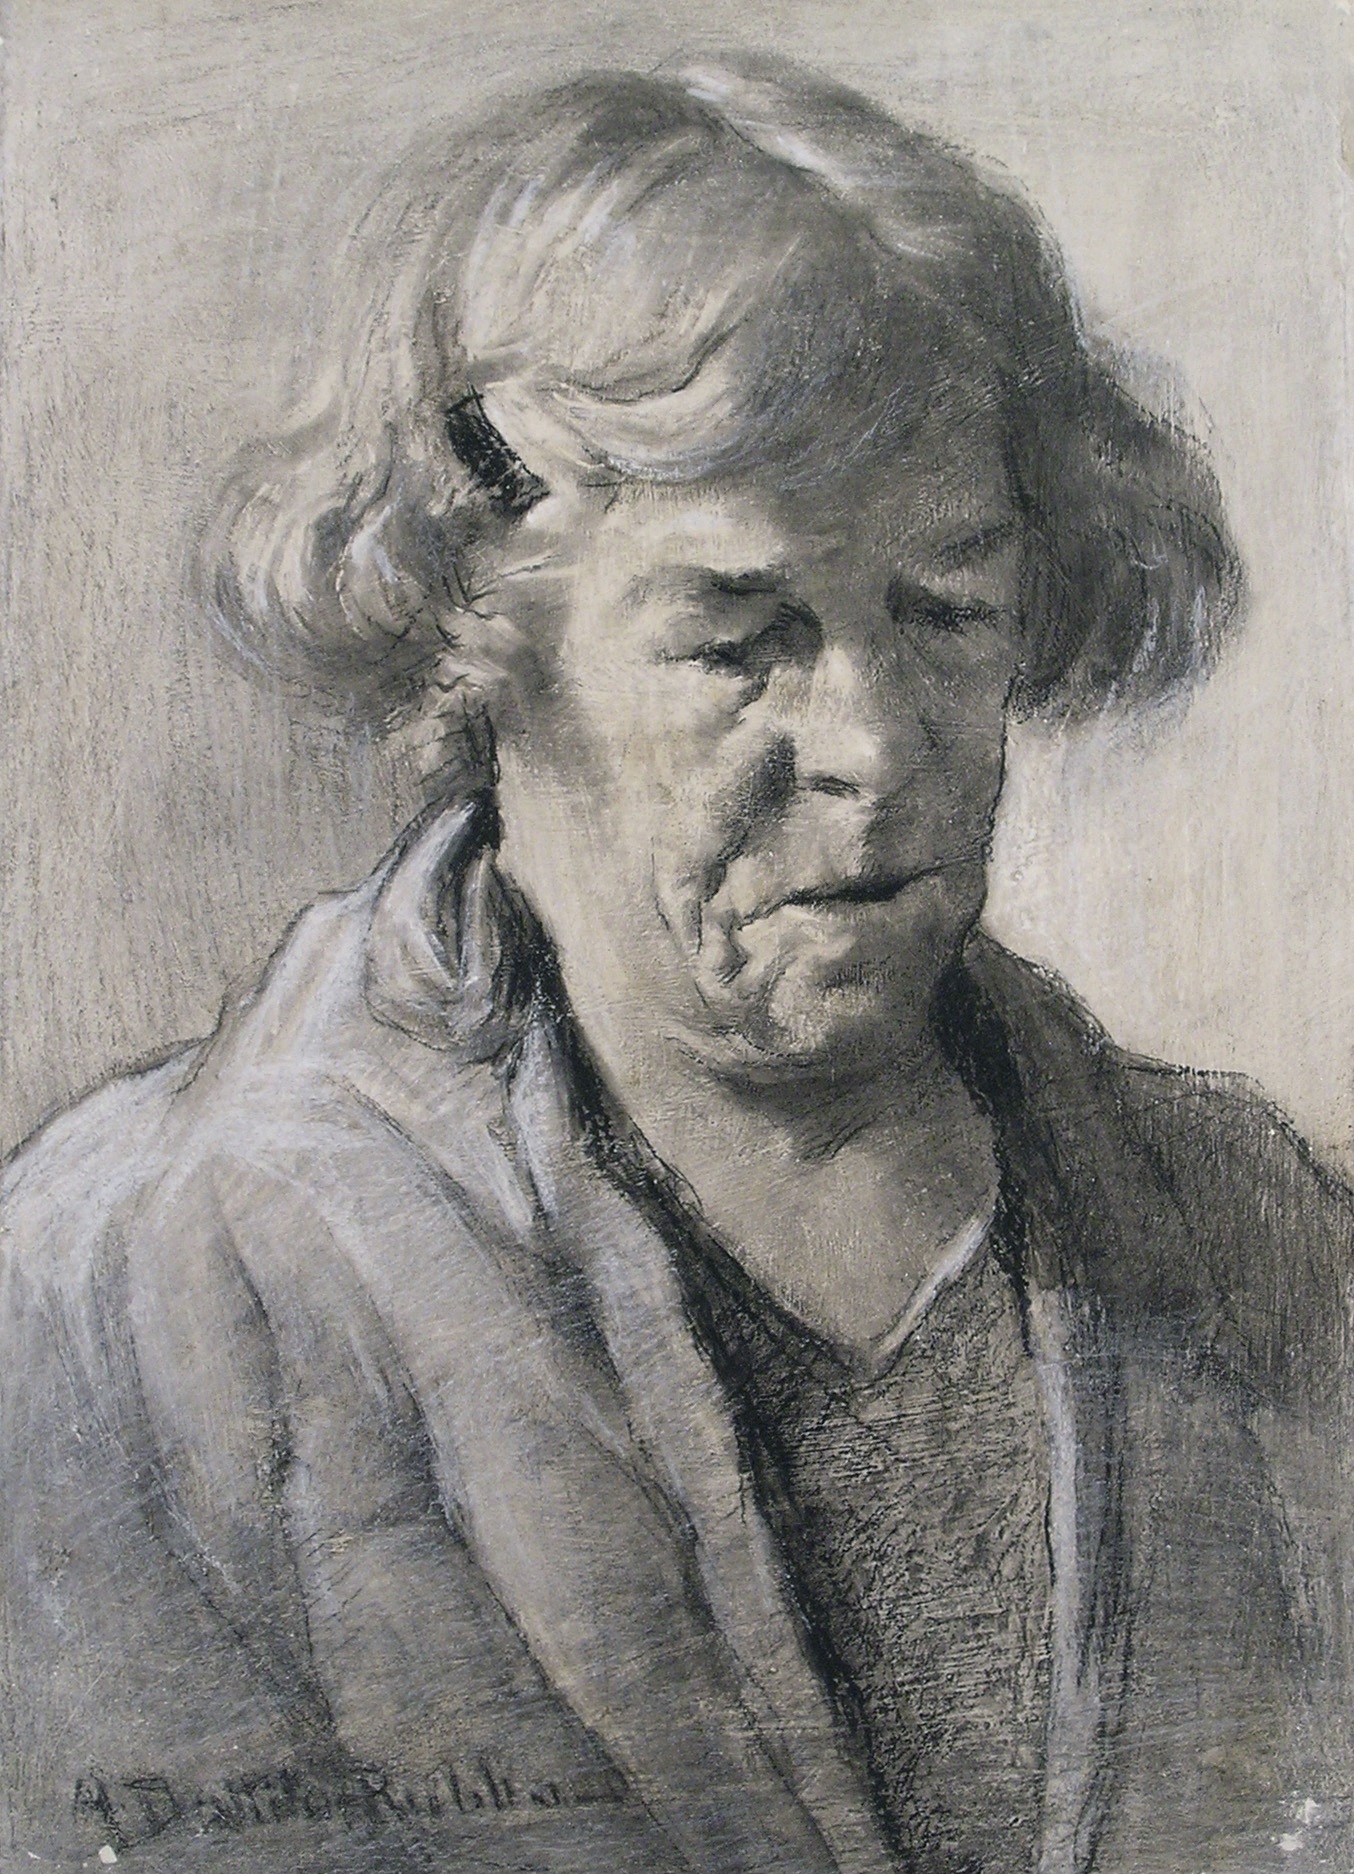 Anthony_Dattilo-Rubbo_Old_Woman_43_x_41cm_Gift_of_the_artist_1955.jpg